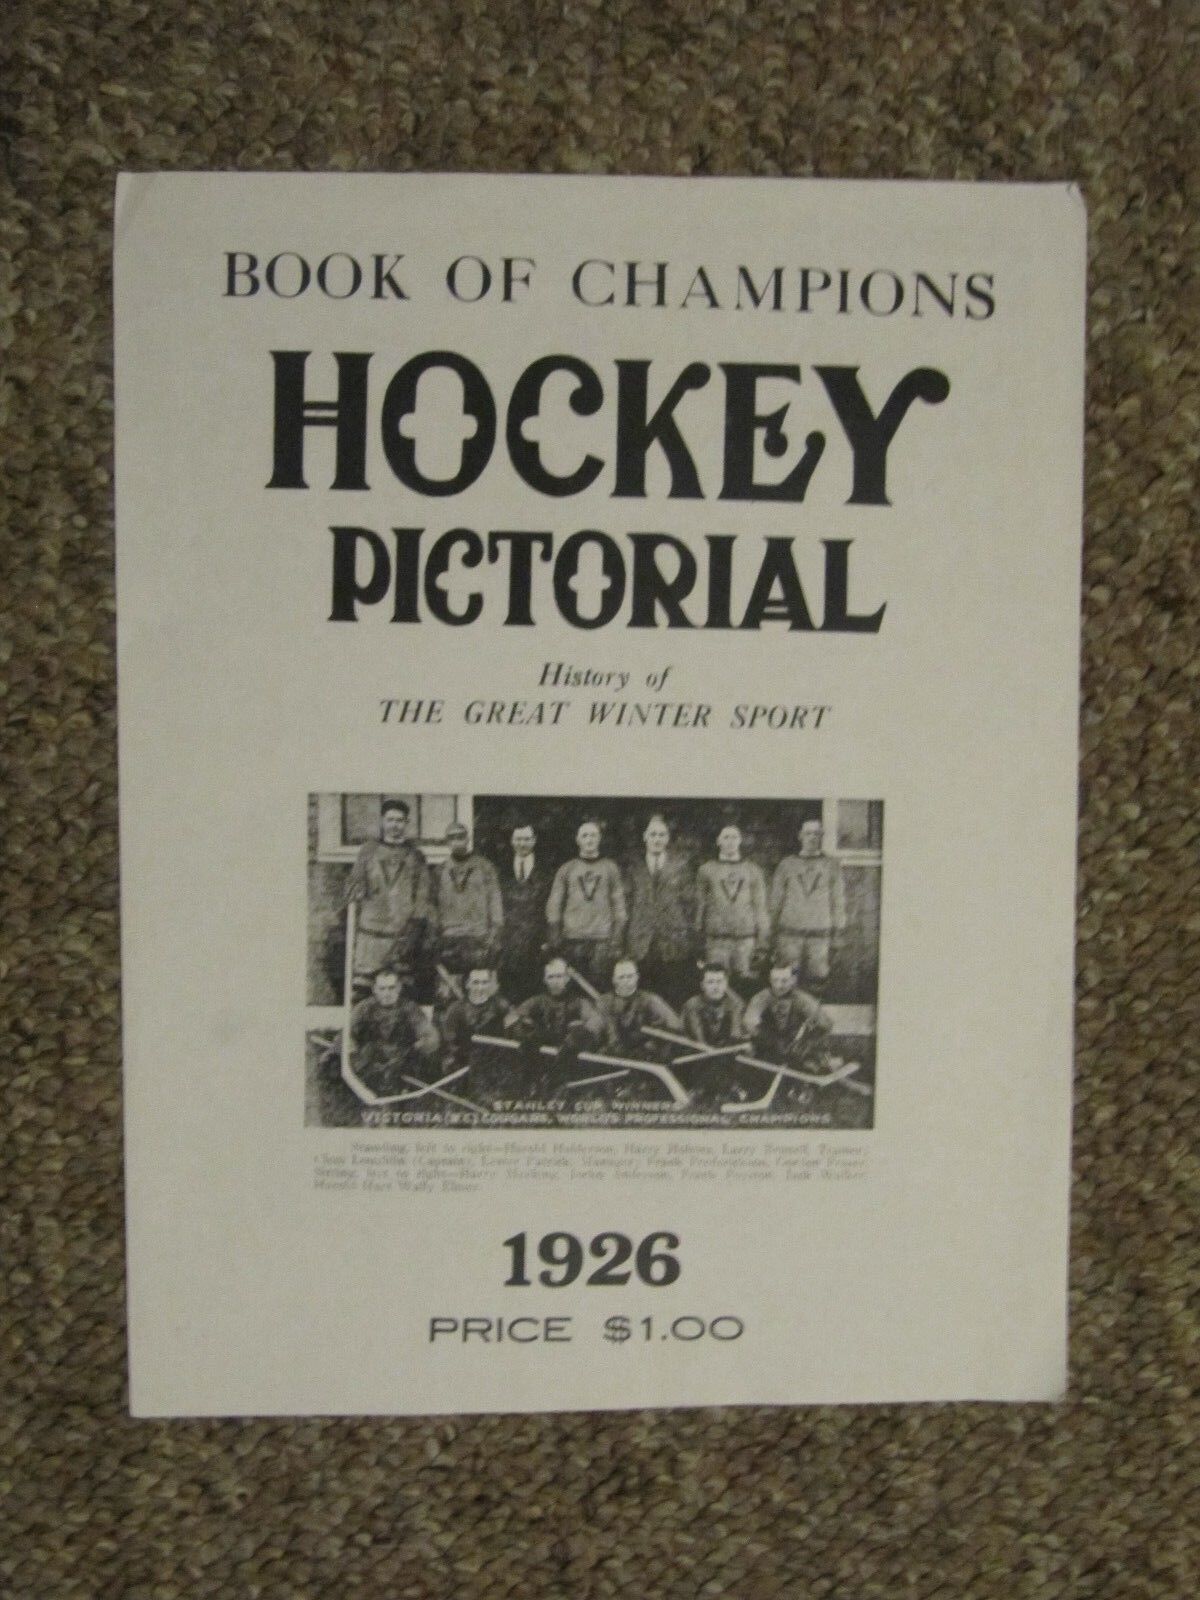 1926 Hockey Book of Champions Pictorial.EXTREMELY RARE